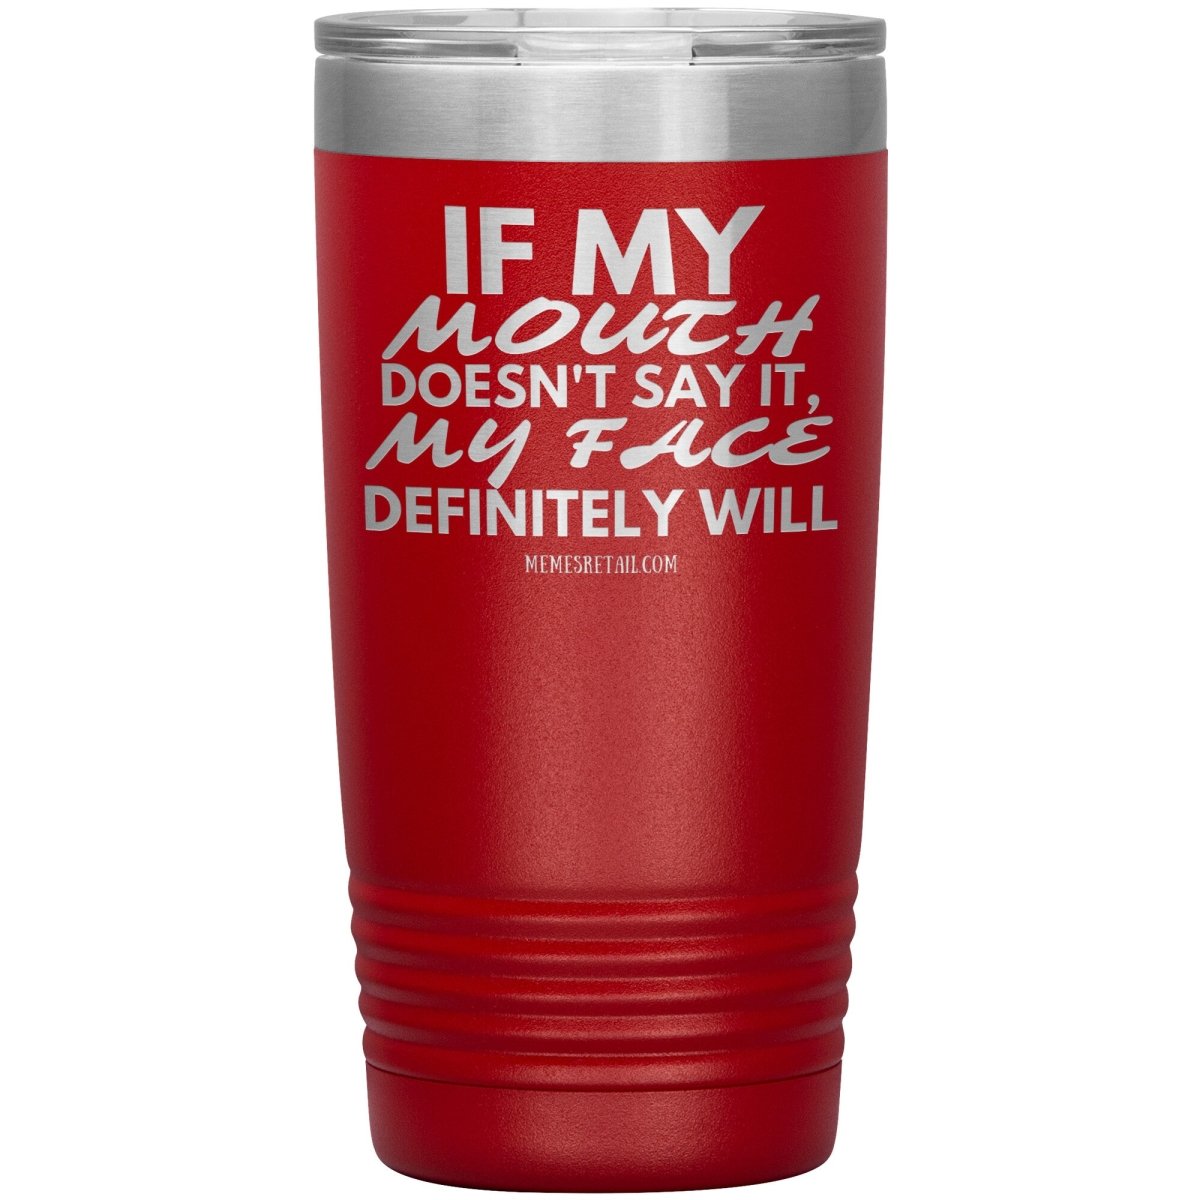 If my mouth doesn't say it, my face definitely will Tumblers, 20oz Insulated Tumbler / Red - MemesRetail.com